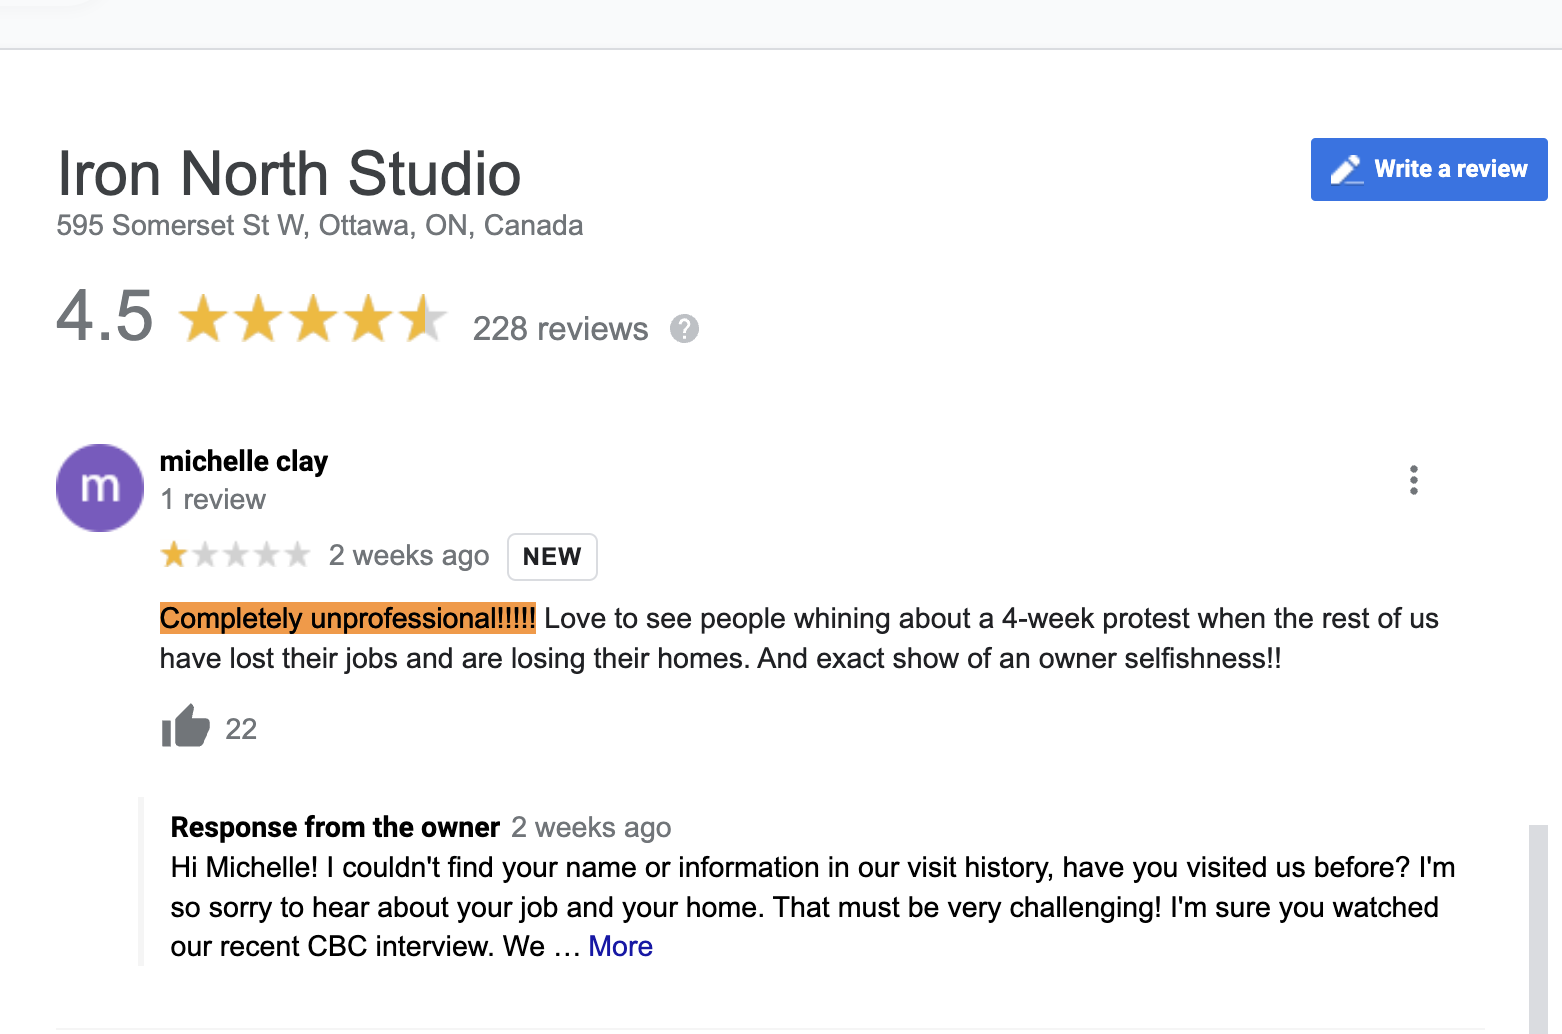 One-star Google review for Iron North Studio